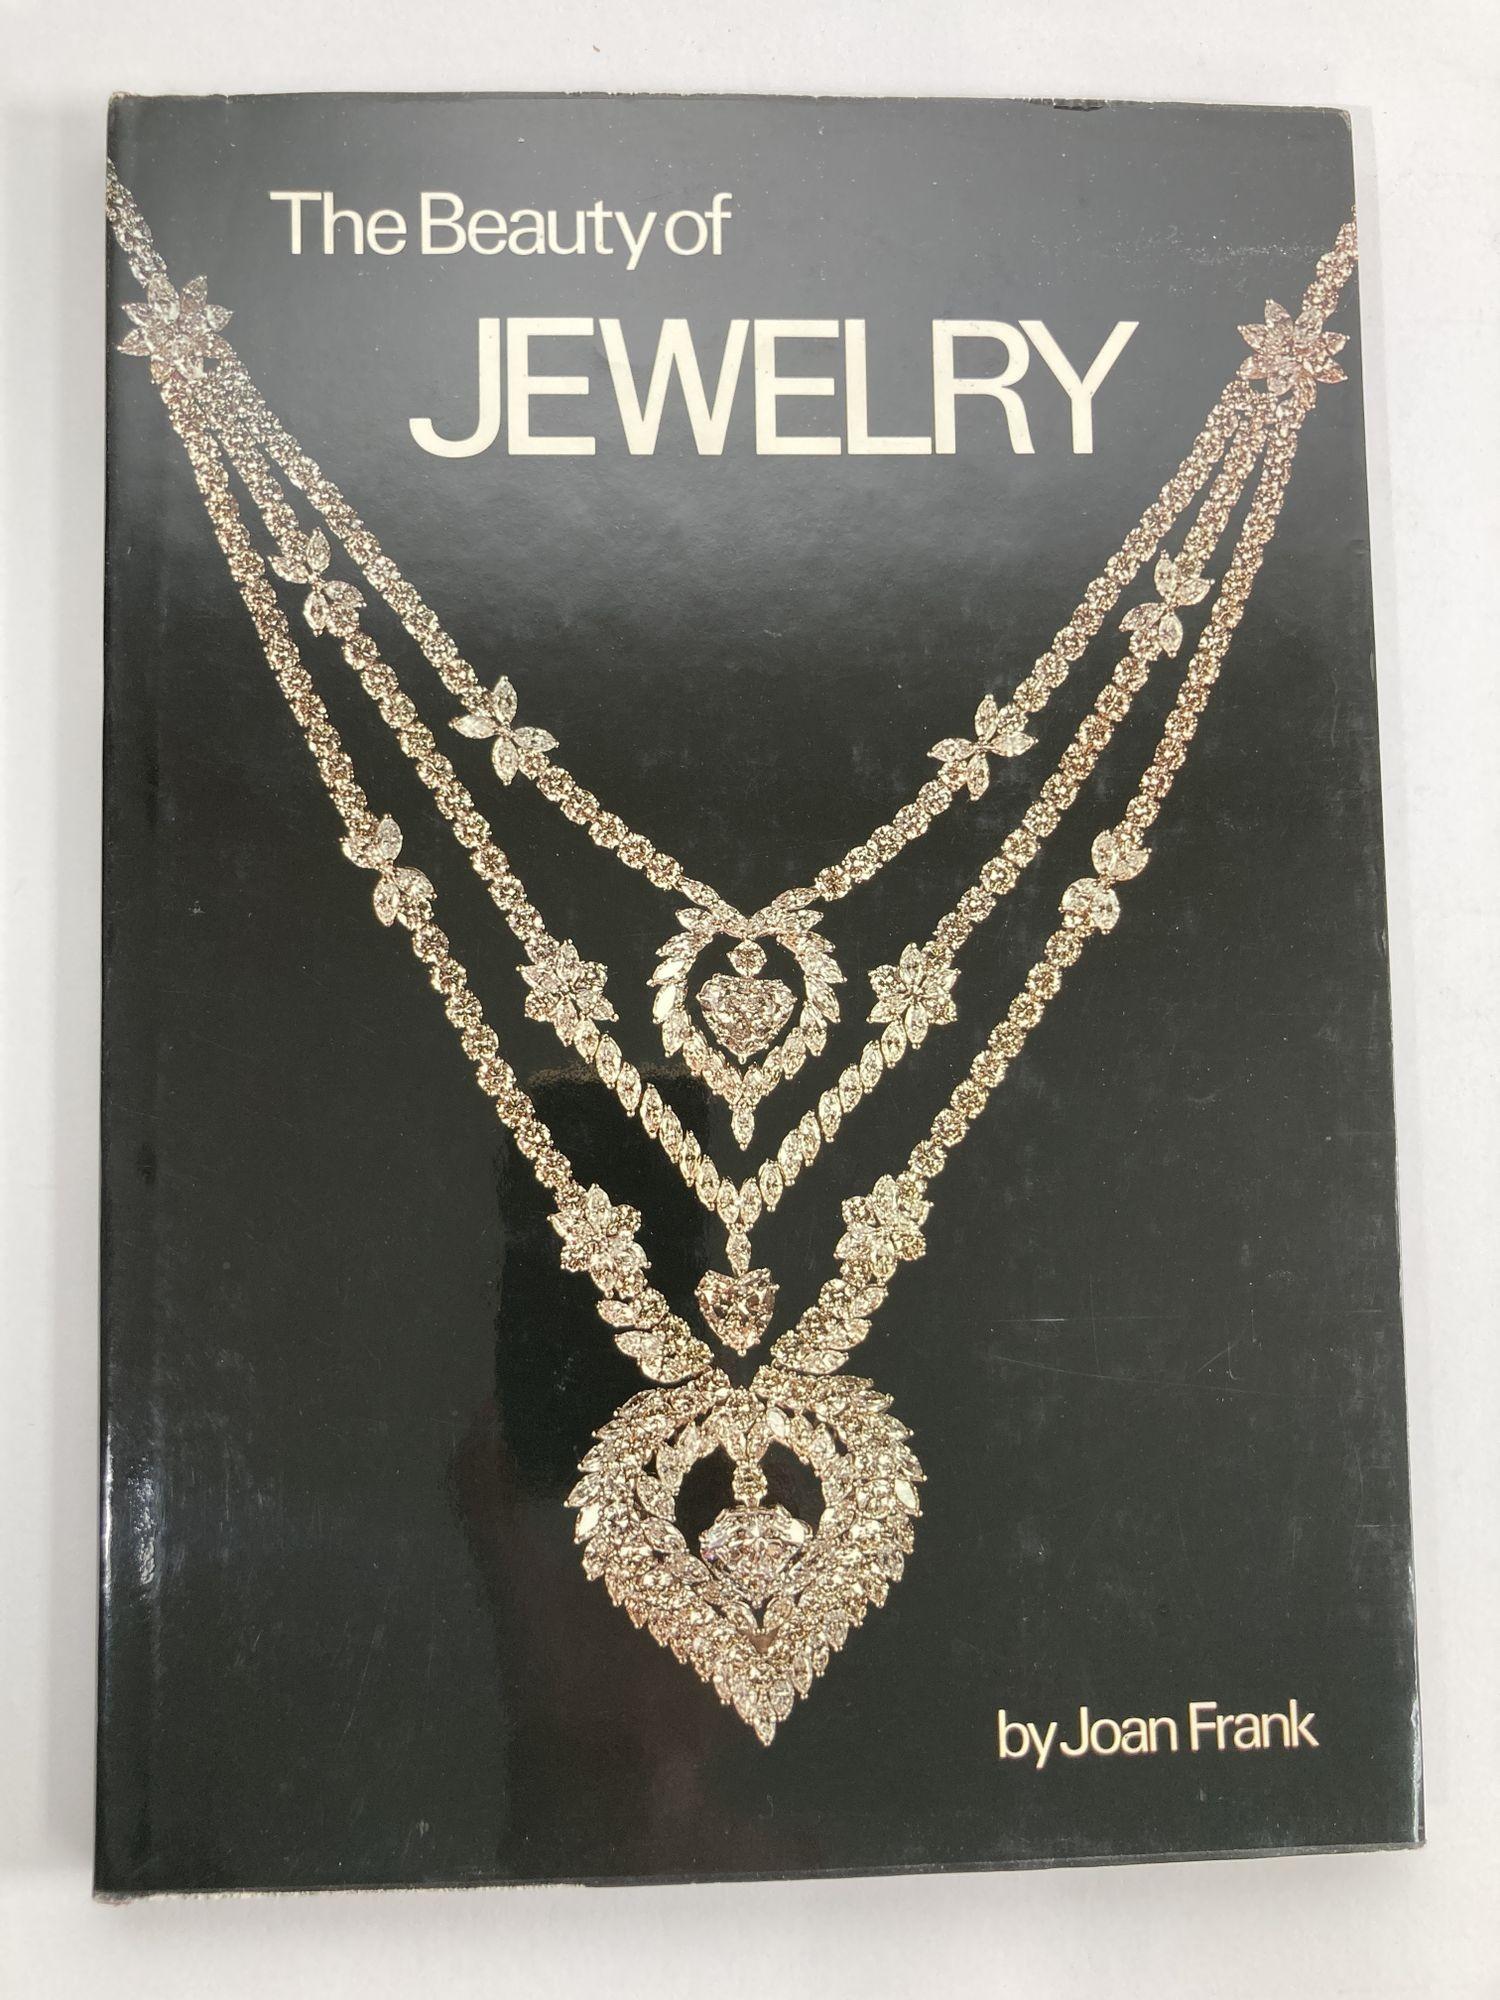 The Beauty of Jewellery Book by Joan Frank.

Crescent Books, 1979 - 93 pages Hardcover 1st Edition.

An appreciation of fine jewelry for the non-expert, with a chapter on the collection at the Victoria and Albert Museum.


Title: Beauty of